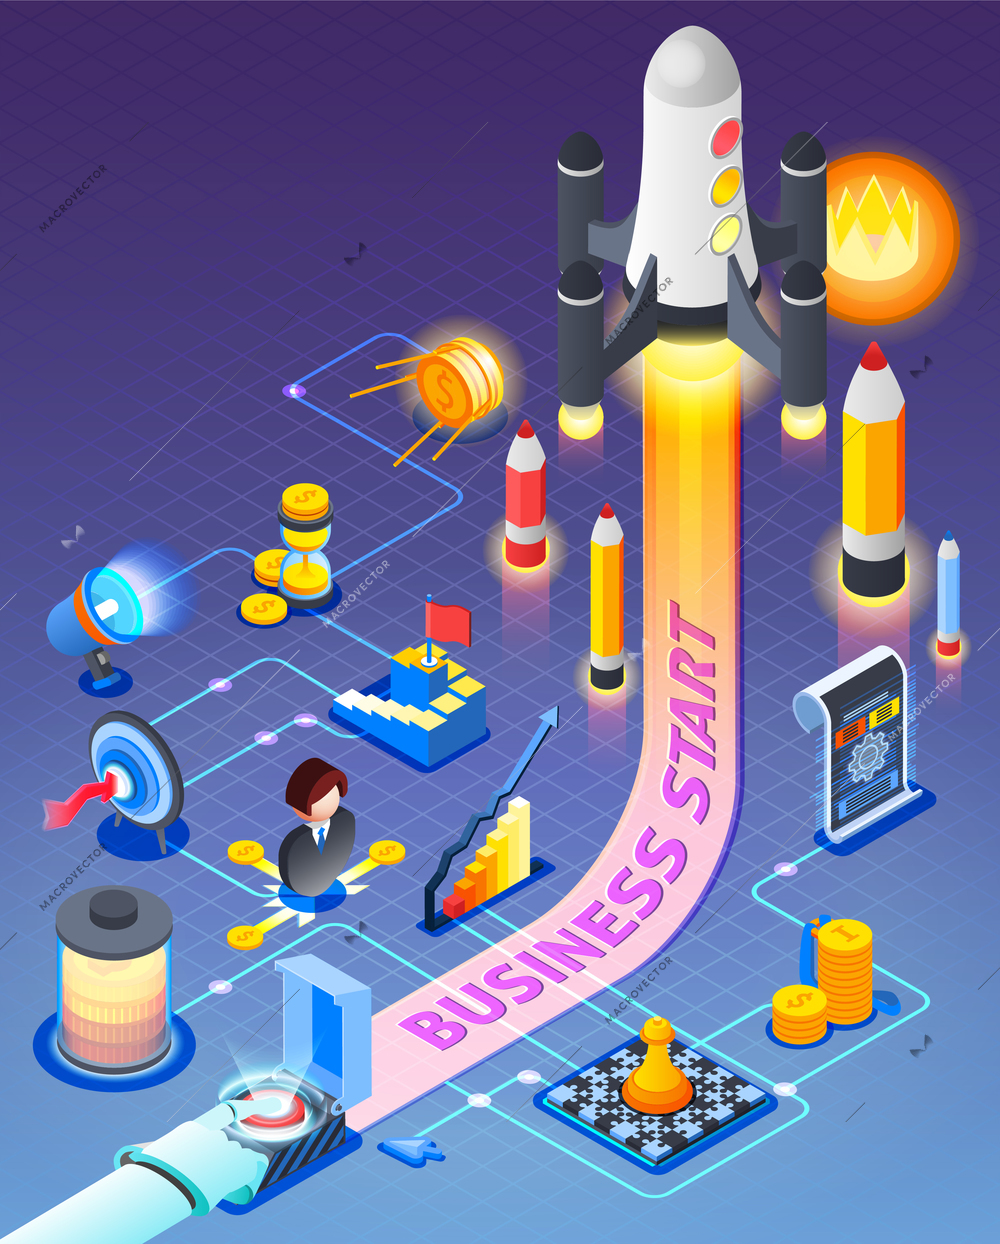 Business start isometric composition on purple background with button for rocket launch, finance, planning, strategy, vector illustration